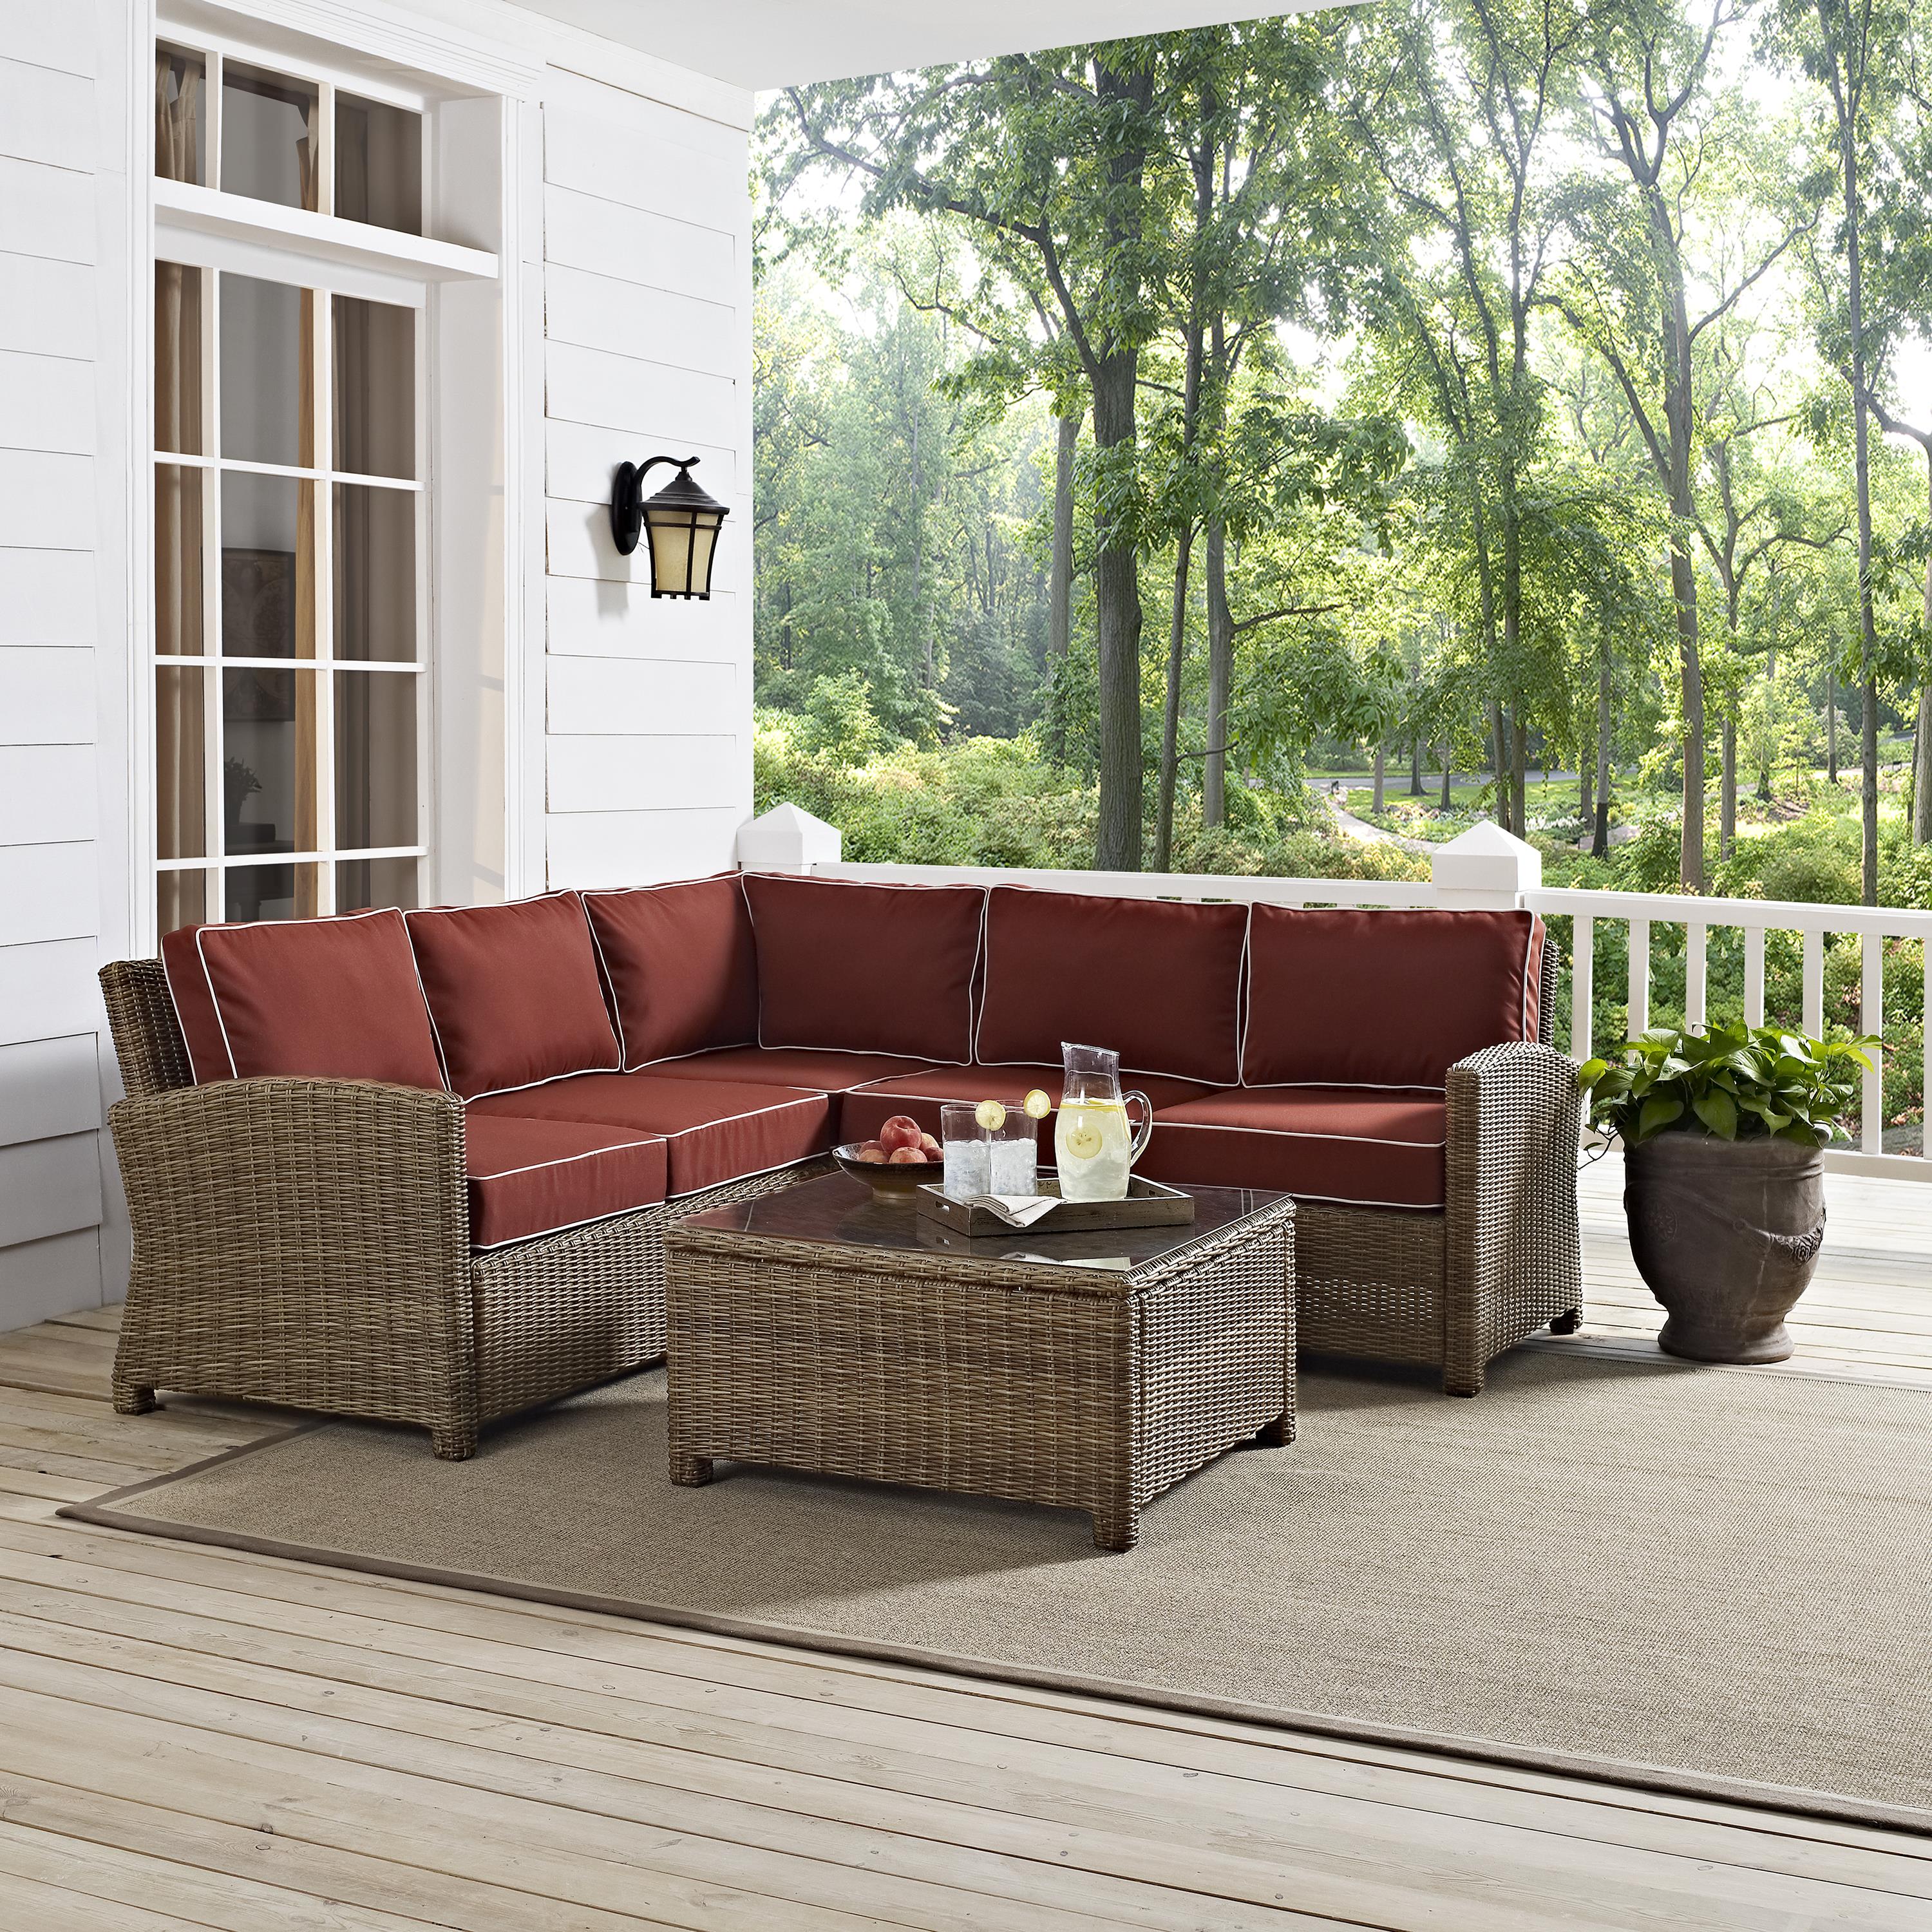 Crosley Furniture Bradenton 4-Piece Outdoor Wicker Seating Set with Sangria Cushions - Right Corner Loveseat, Left Corner Loveseat, Corner Chair, Sectional Glass Top Coffee Table - image 5 of 10